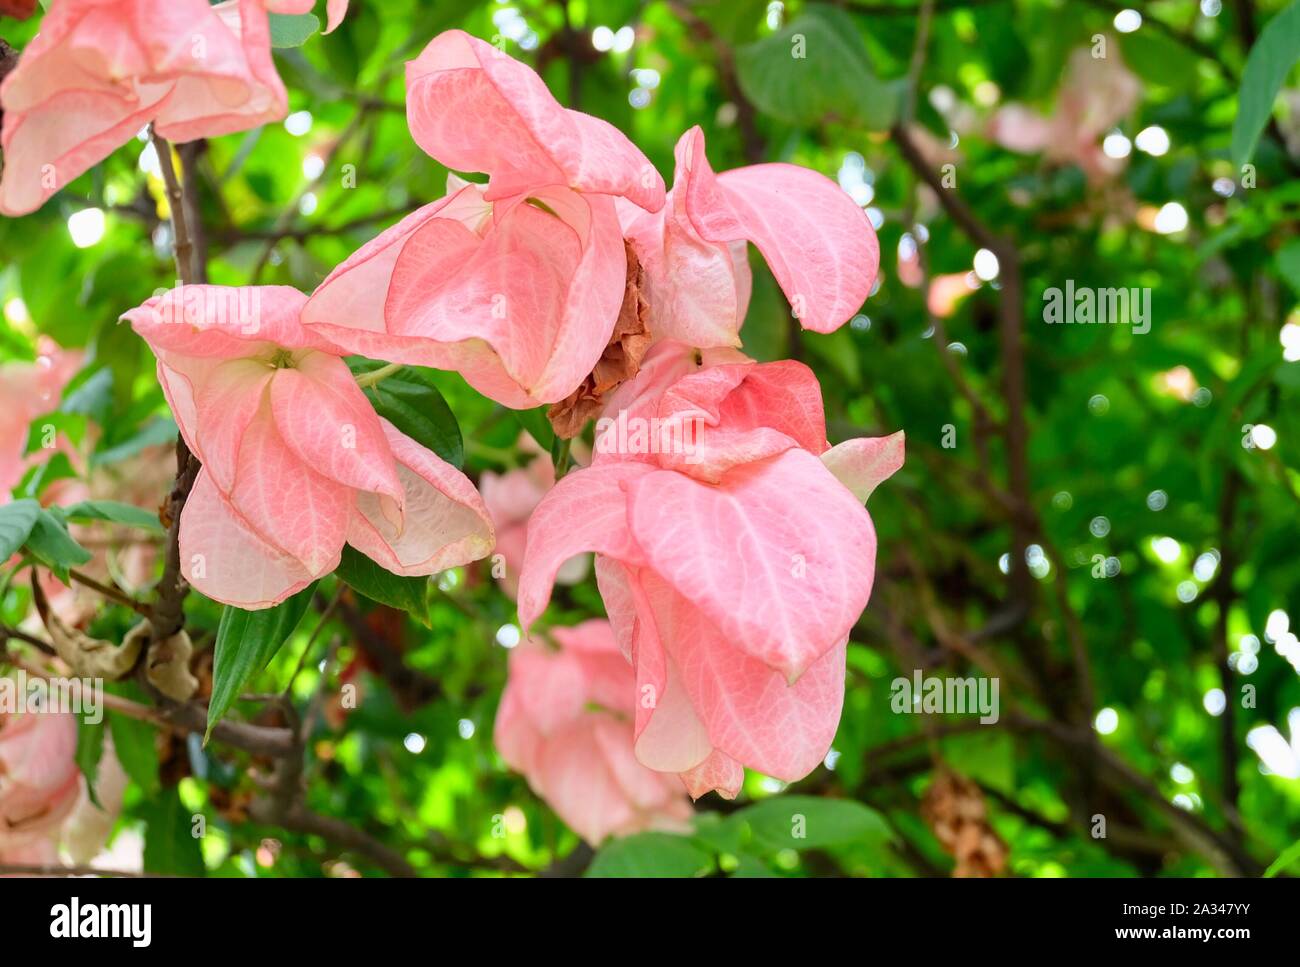 Bunch of Fresh Old Rose Mussaenda Philippica or Donna Queen Sirikit Flowers on Green Tree. Stock Photo